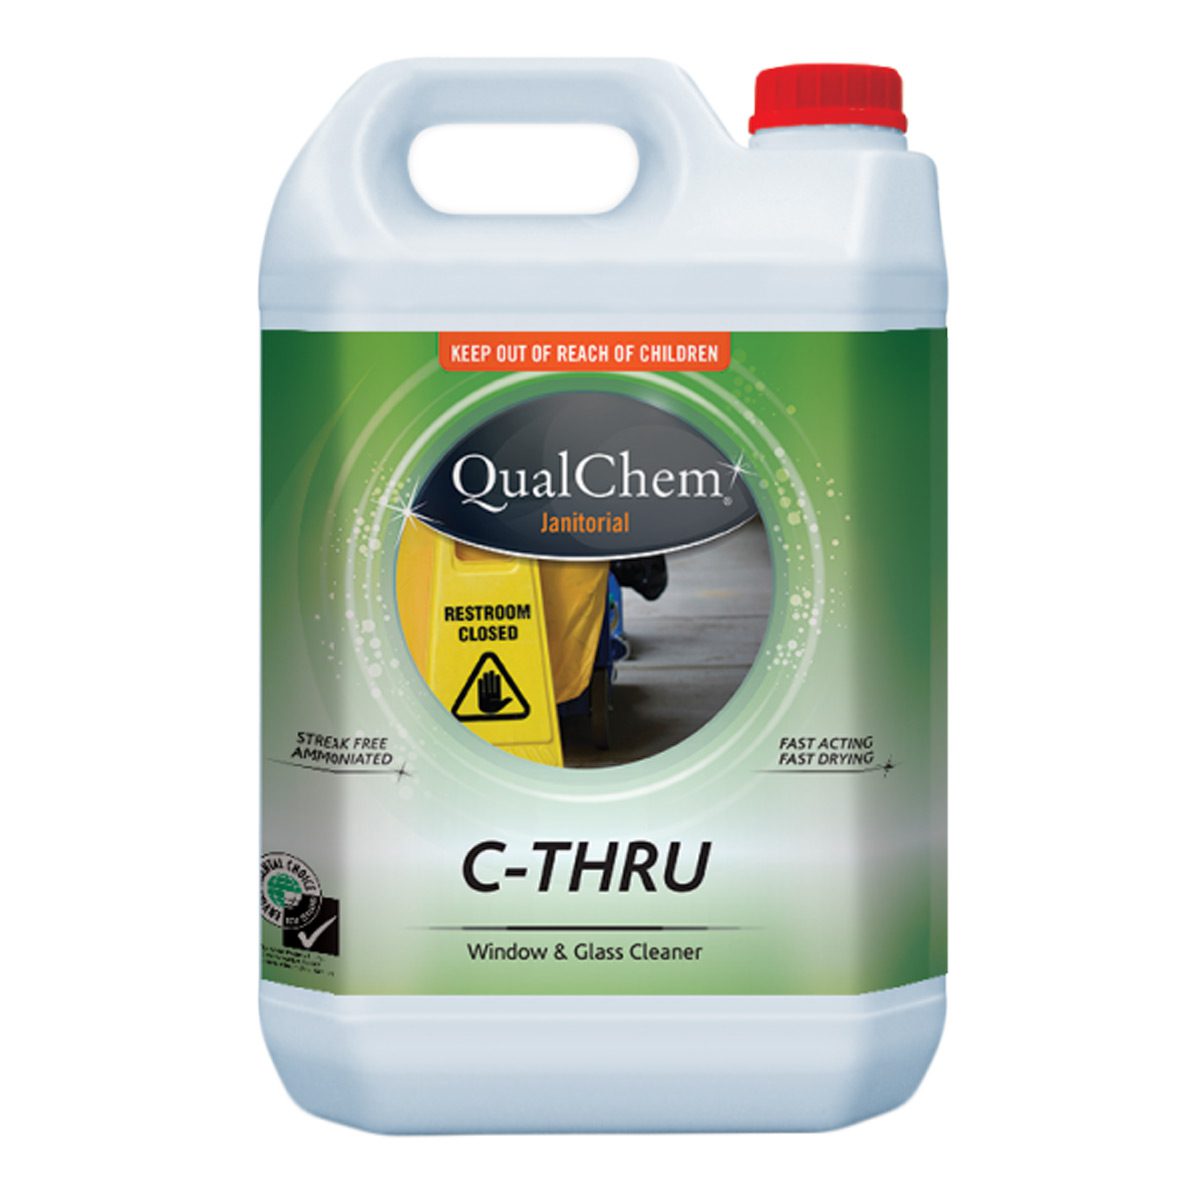 cleaning-products-kitchen-multipurpose-qualchem-c-thru-window-cleaner-5L-ammoniated-clear-blue-window-and-glass-cleaner-removes-dirt-grime-fingerprints-smudges-grease-smoke-vjs-distributors-CTU5